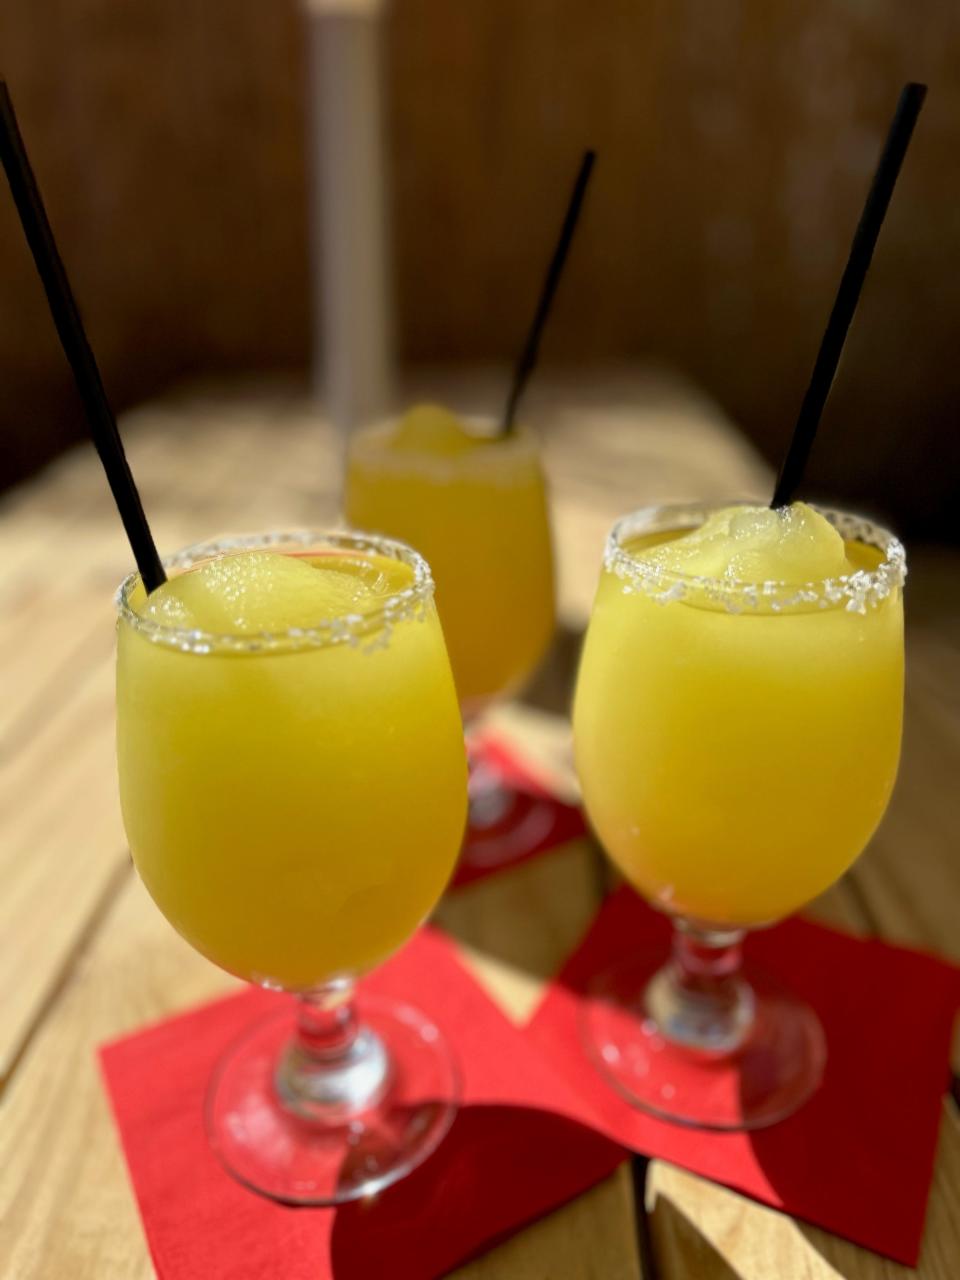 The Half-and-Half Margaritas at Molly's La Casita.   Instead of ice, on-the-rocks margaritas are married with frozen margaritas to keep the drink cold.